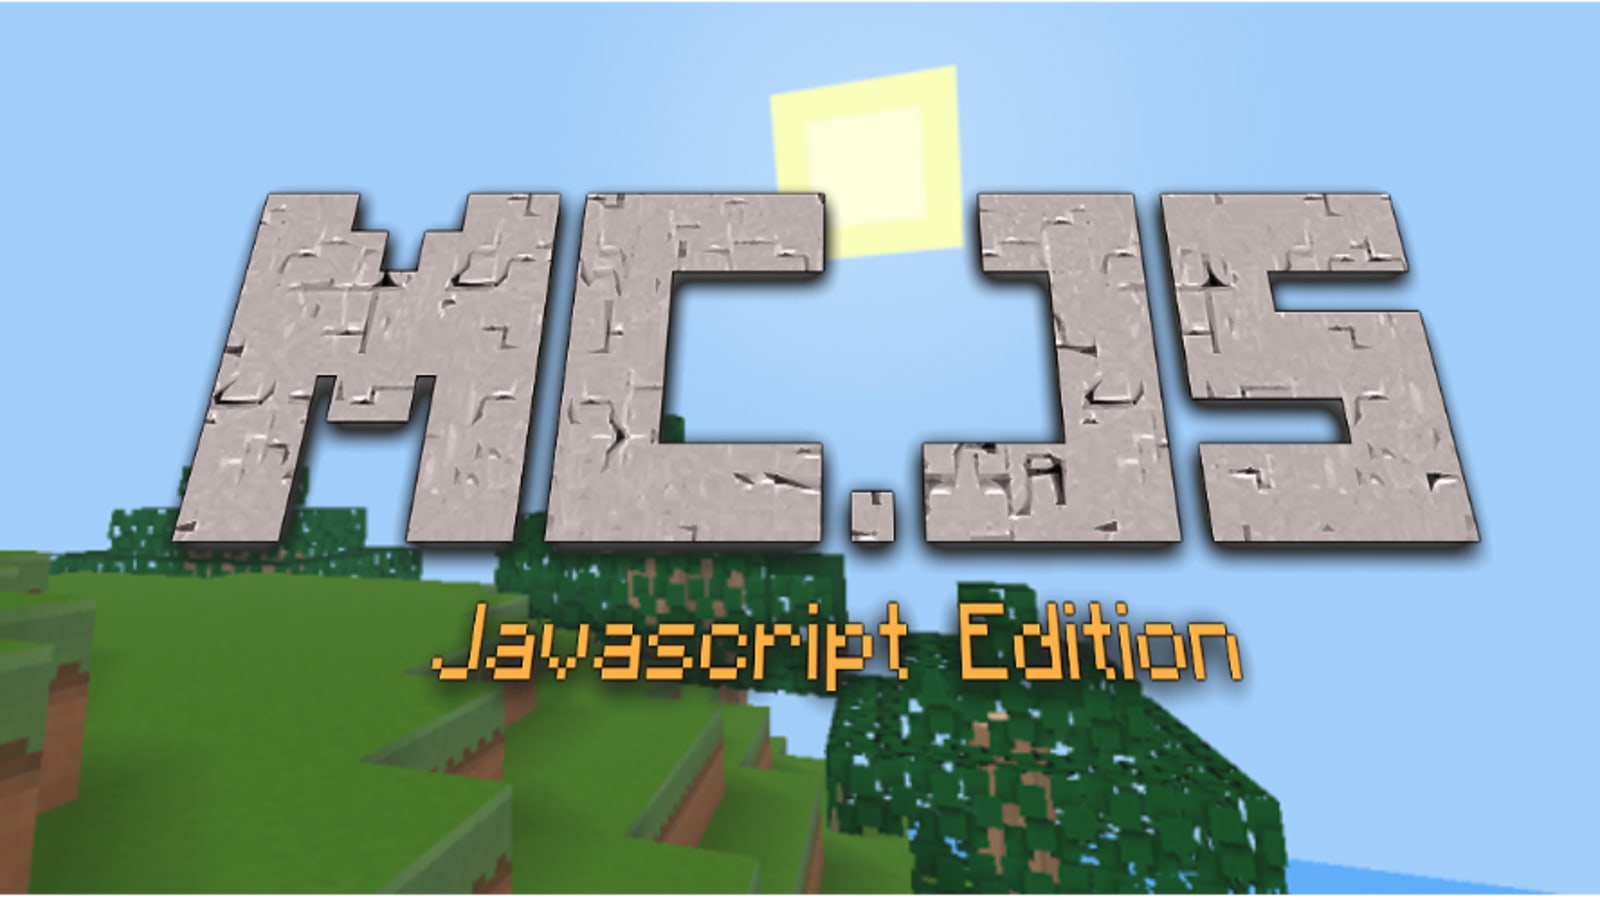 Mincecraft in browser? - Discussion - Minecraft: Java Edition